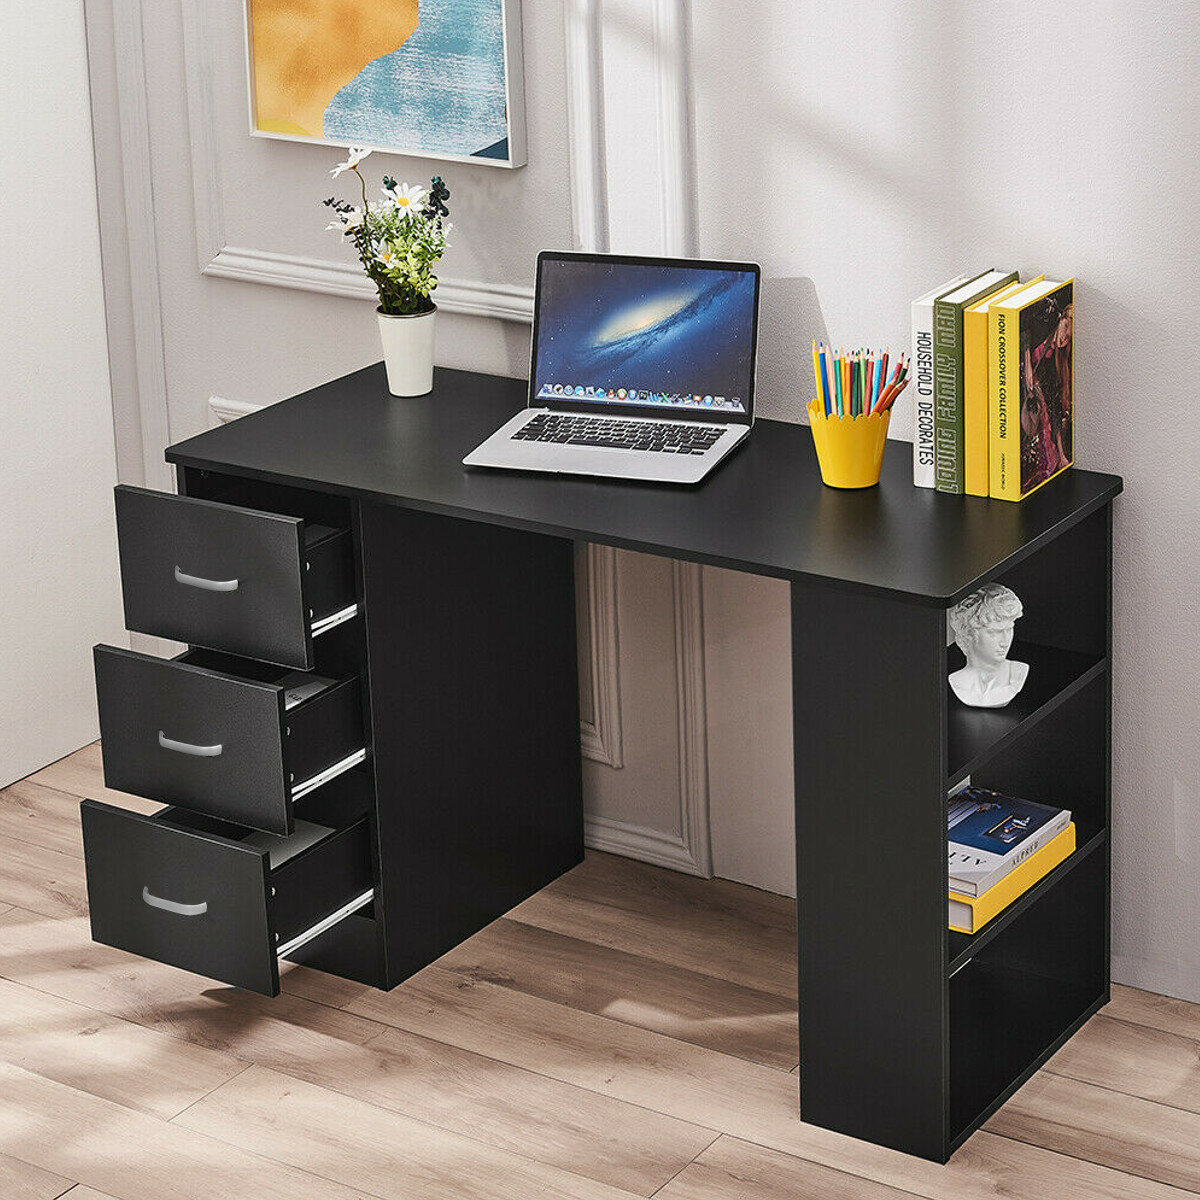 Image of Hoffree Computer Desk PC Laptop MDF Wood Table With 3 Drawers and Shelves for Home Office